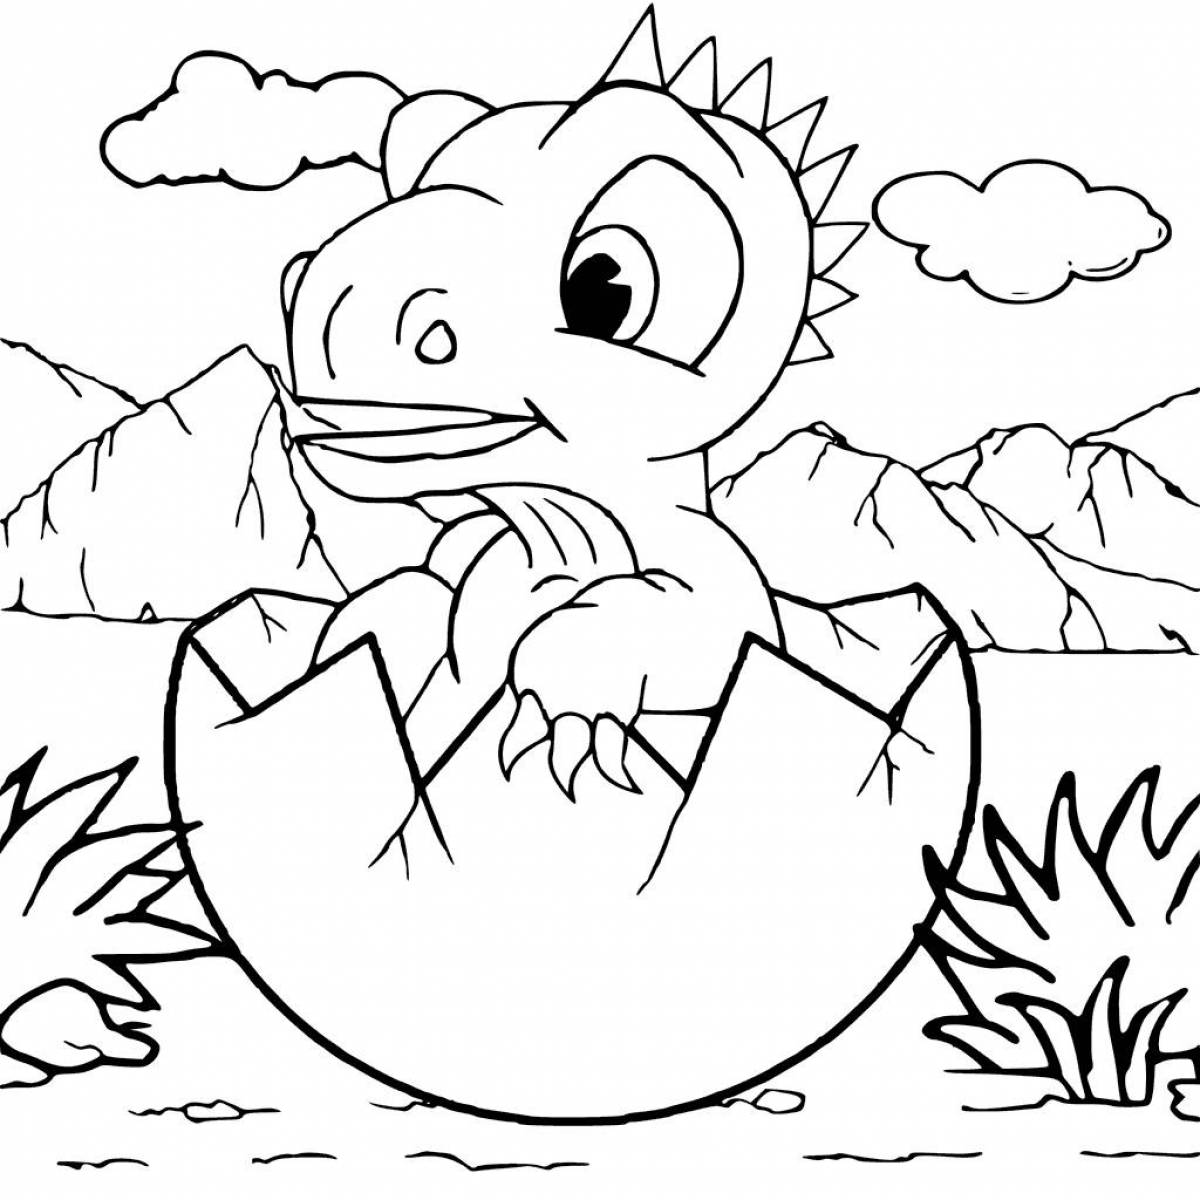 Joyous dino team coloring page